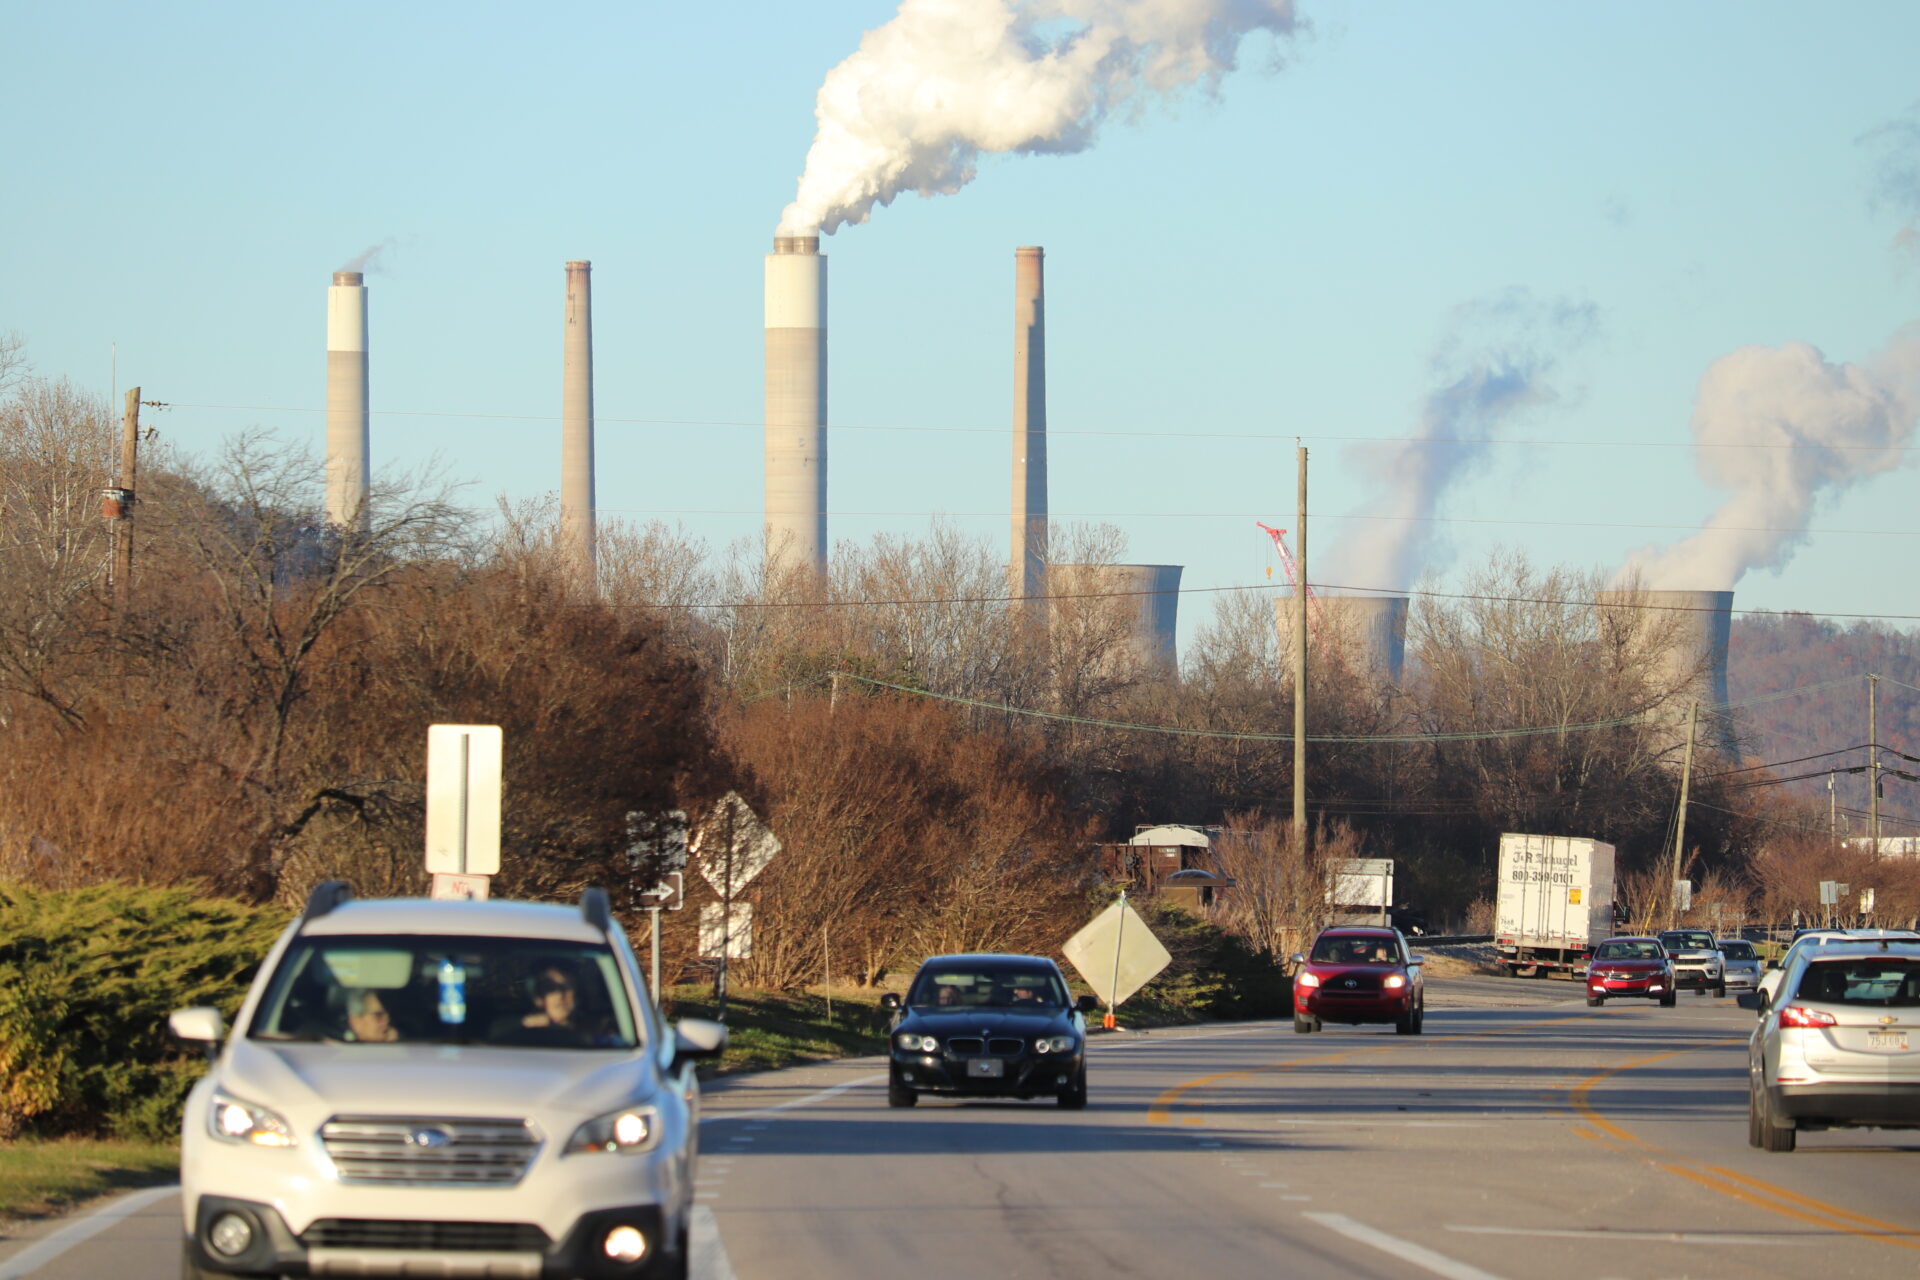 EPA Rule On Carbon Emissions Won’t Apply To Existing Gas Plants